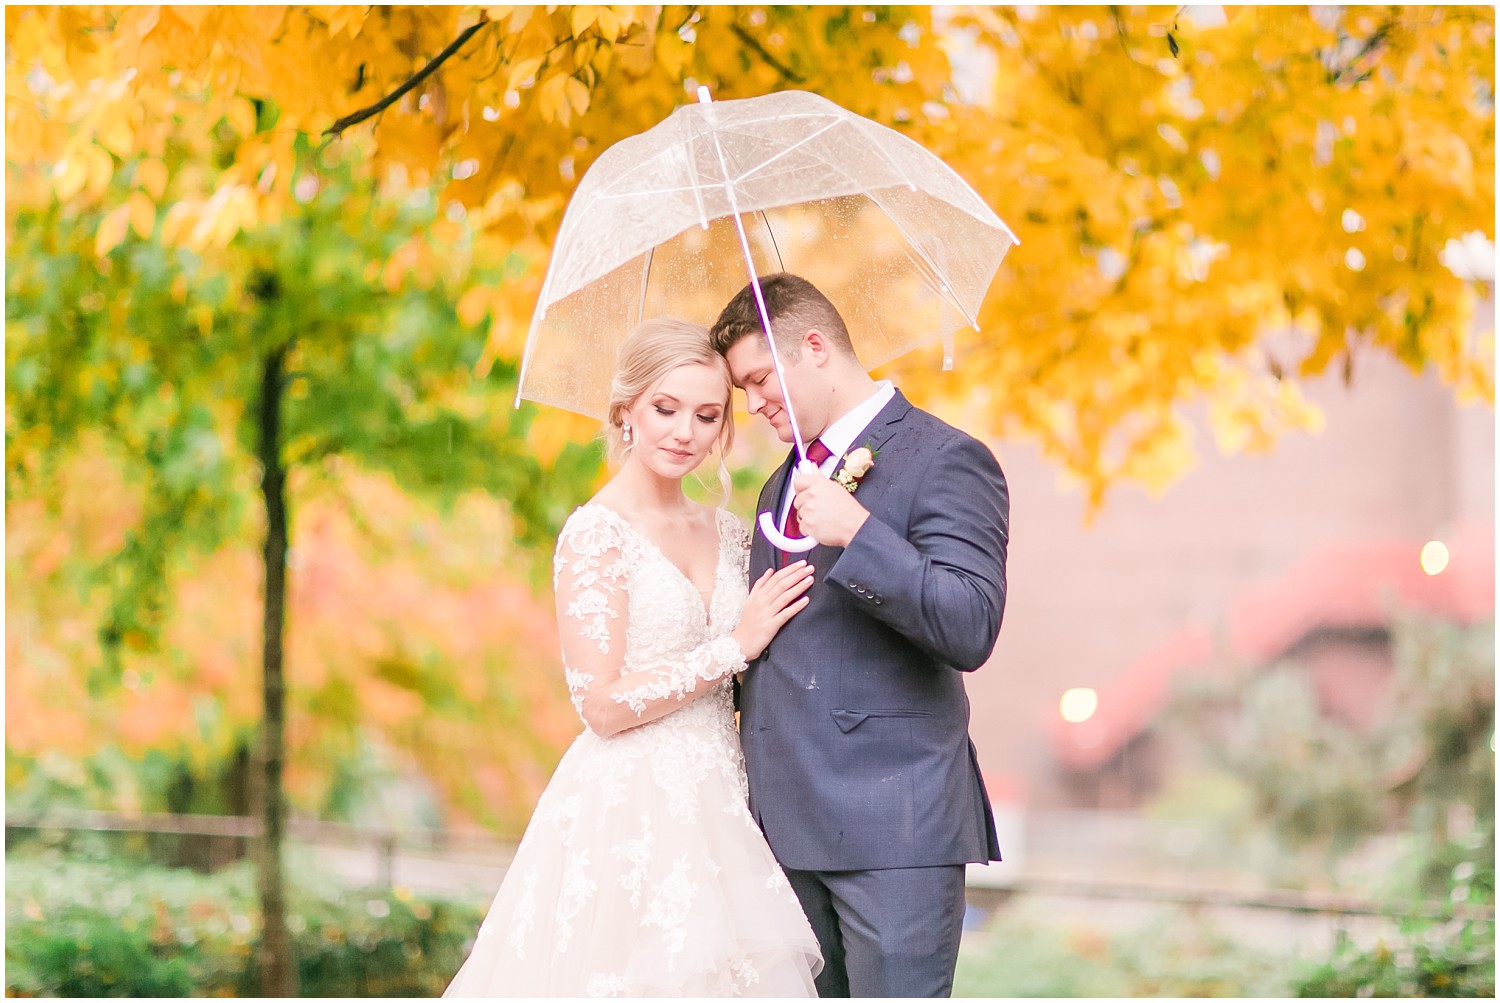 The Case of the Rainy Day Wedding | For Brides